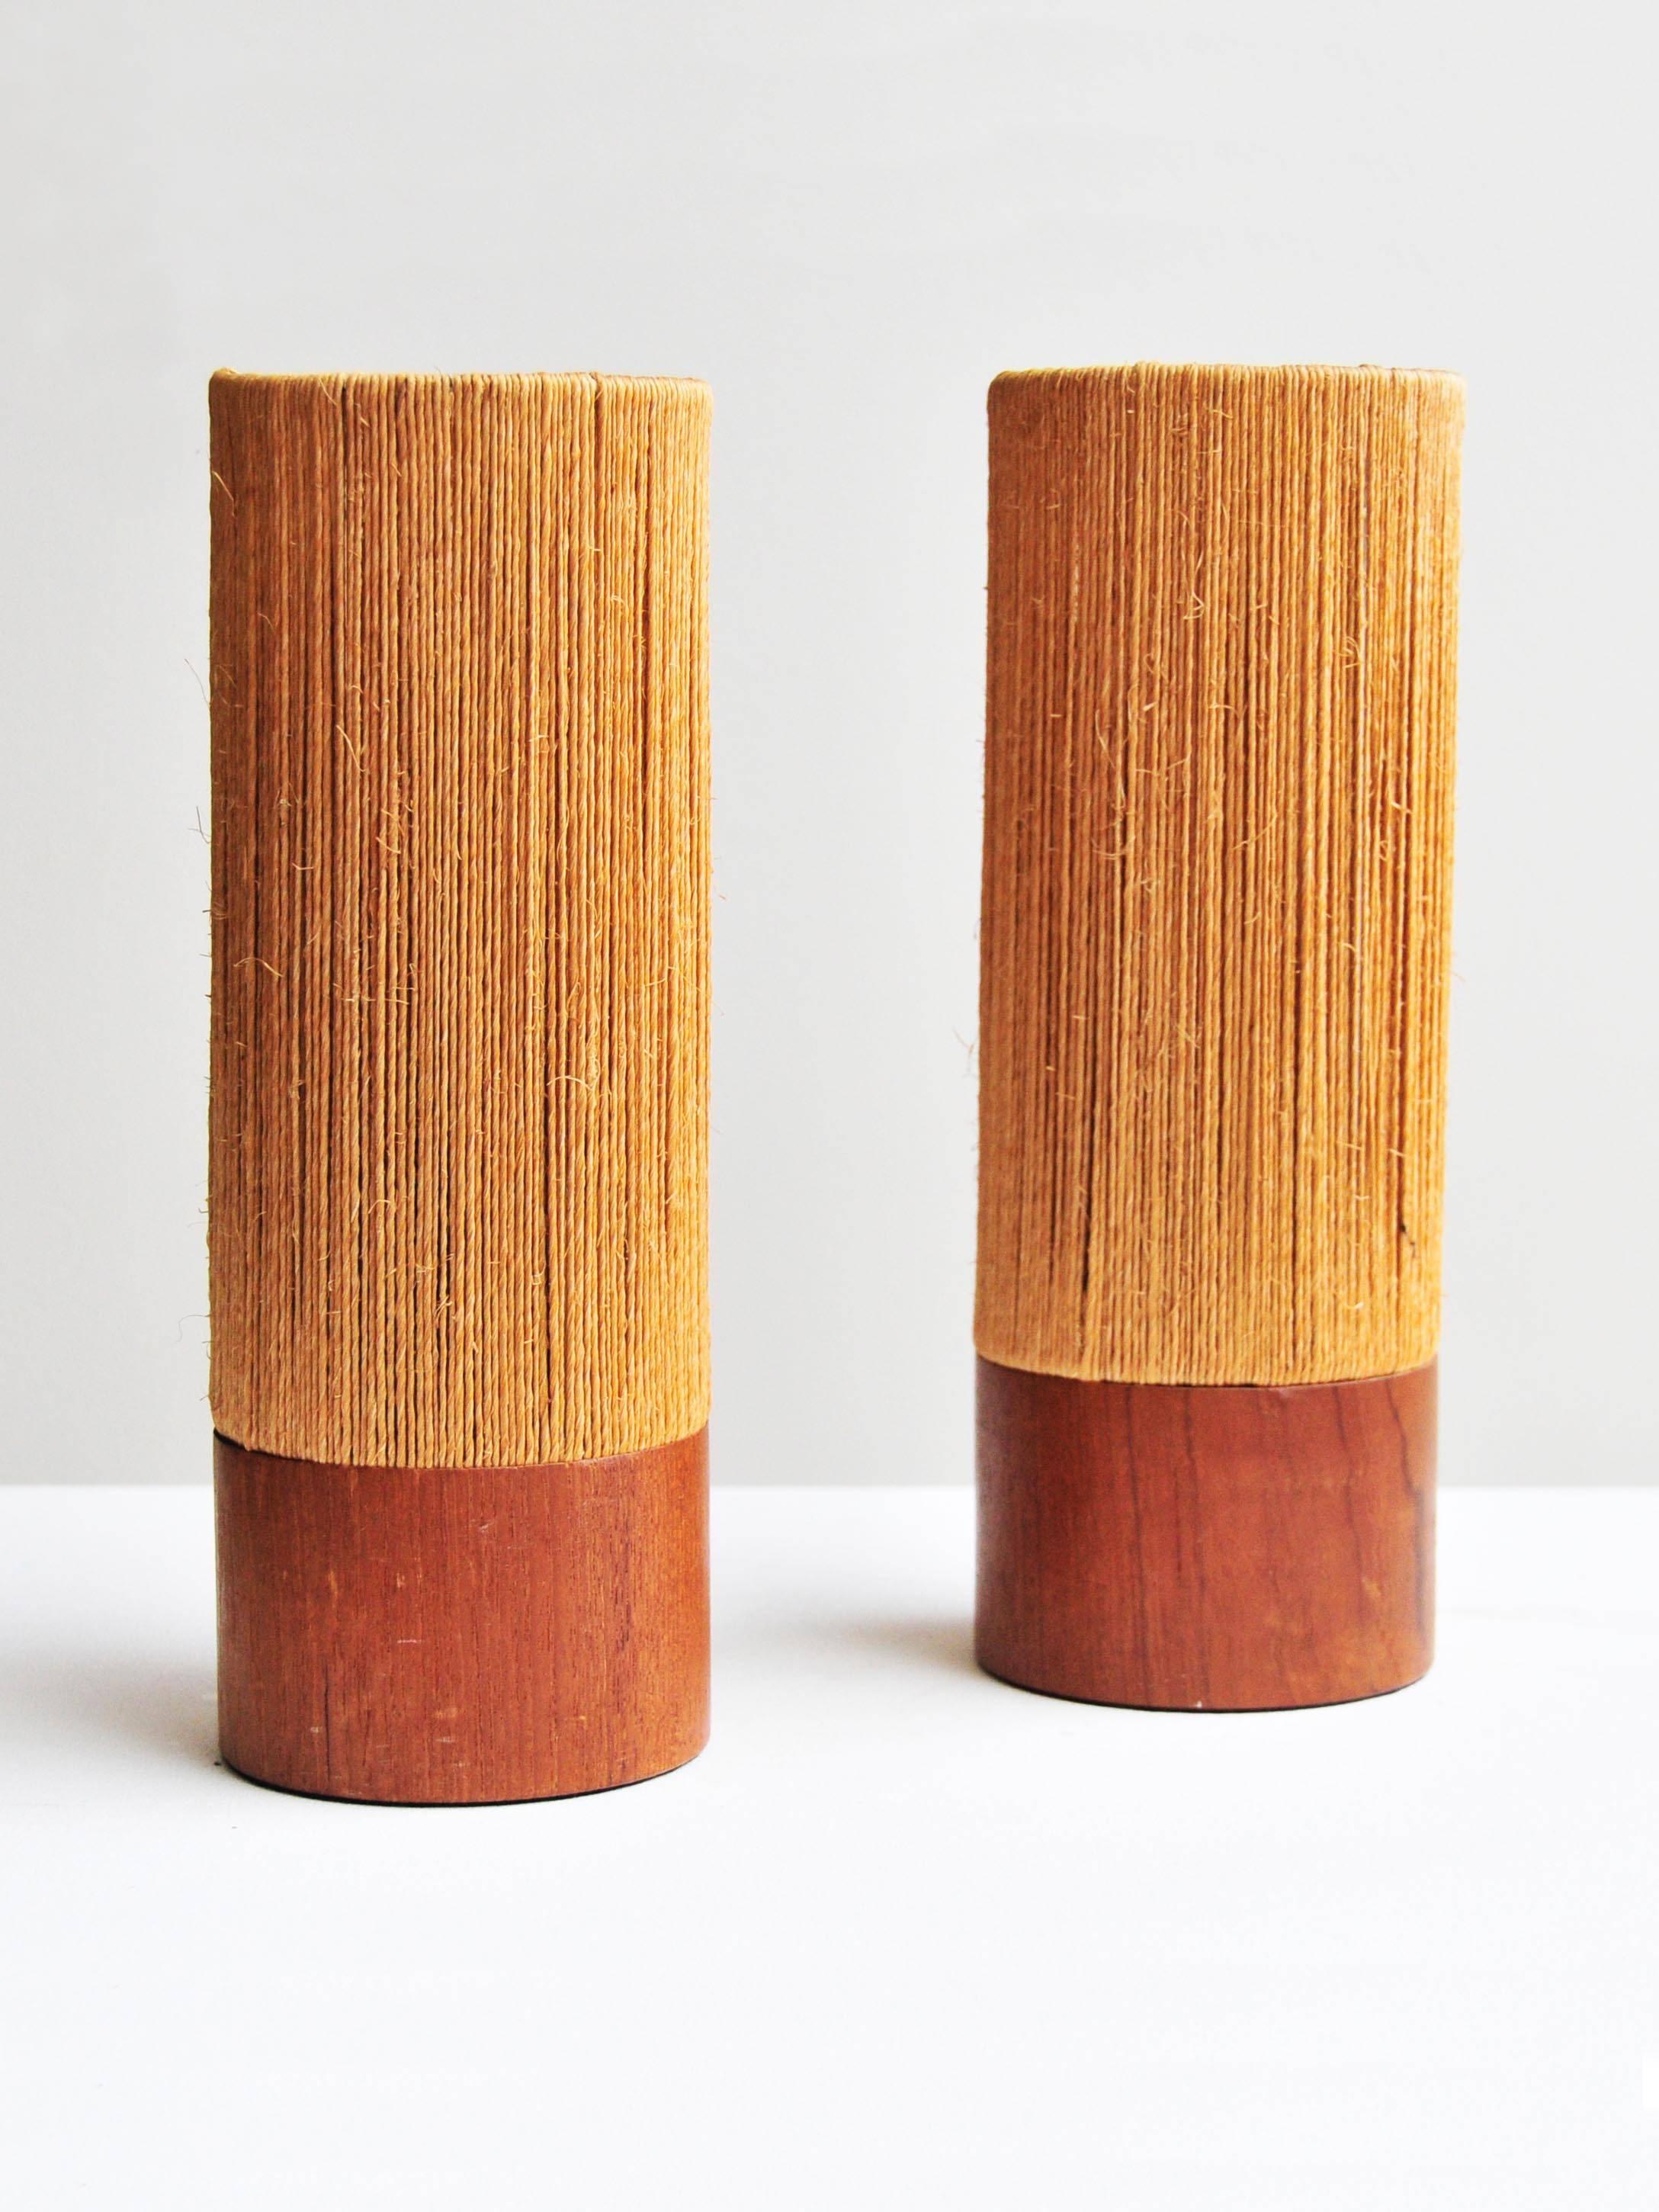 Of simple cylindrical form with teak wooden bases supporting delicate rope shades,

France, mid-20th century.